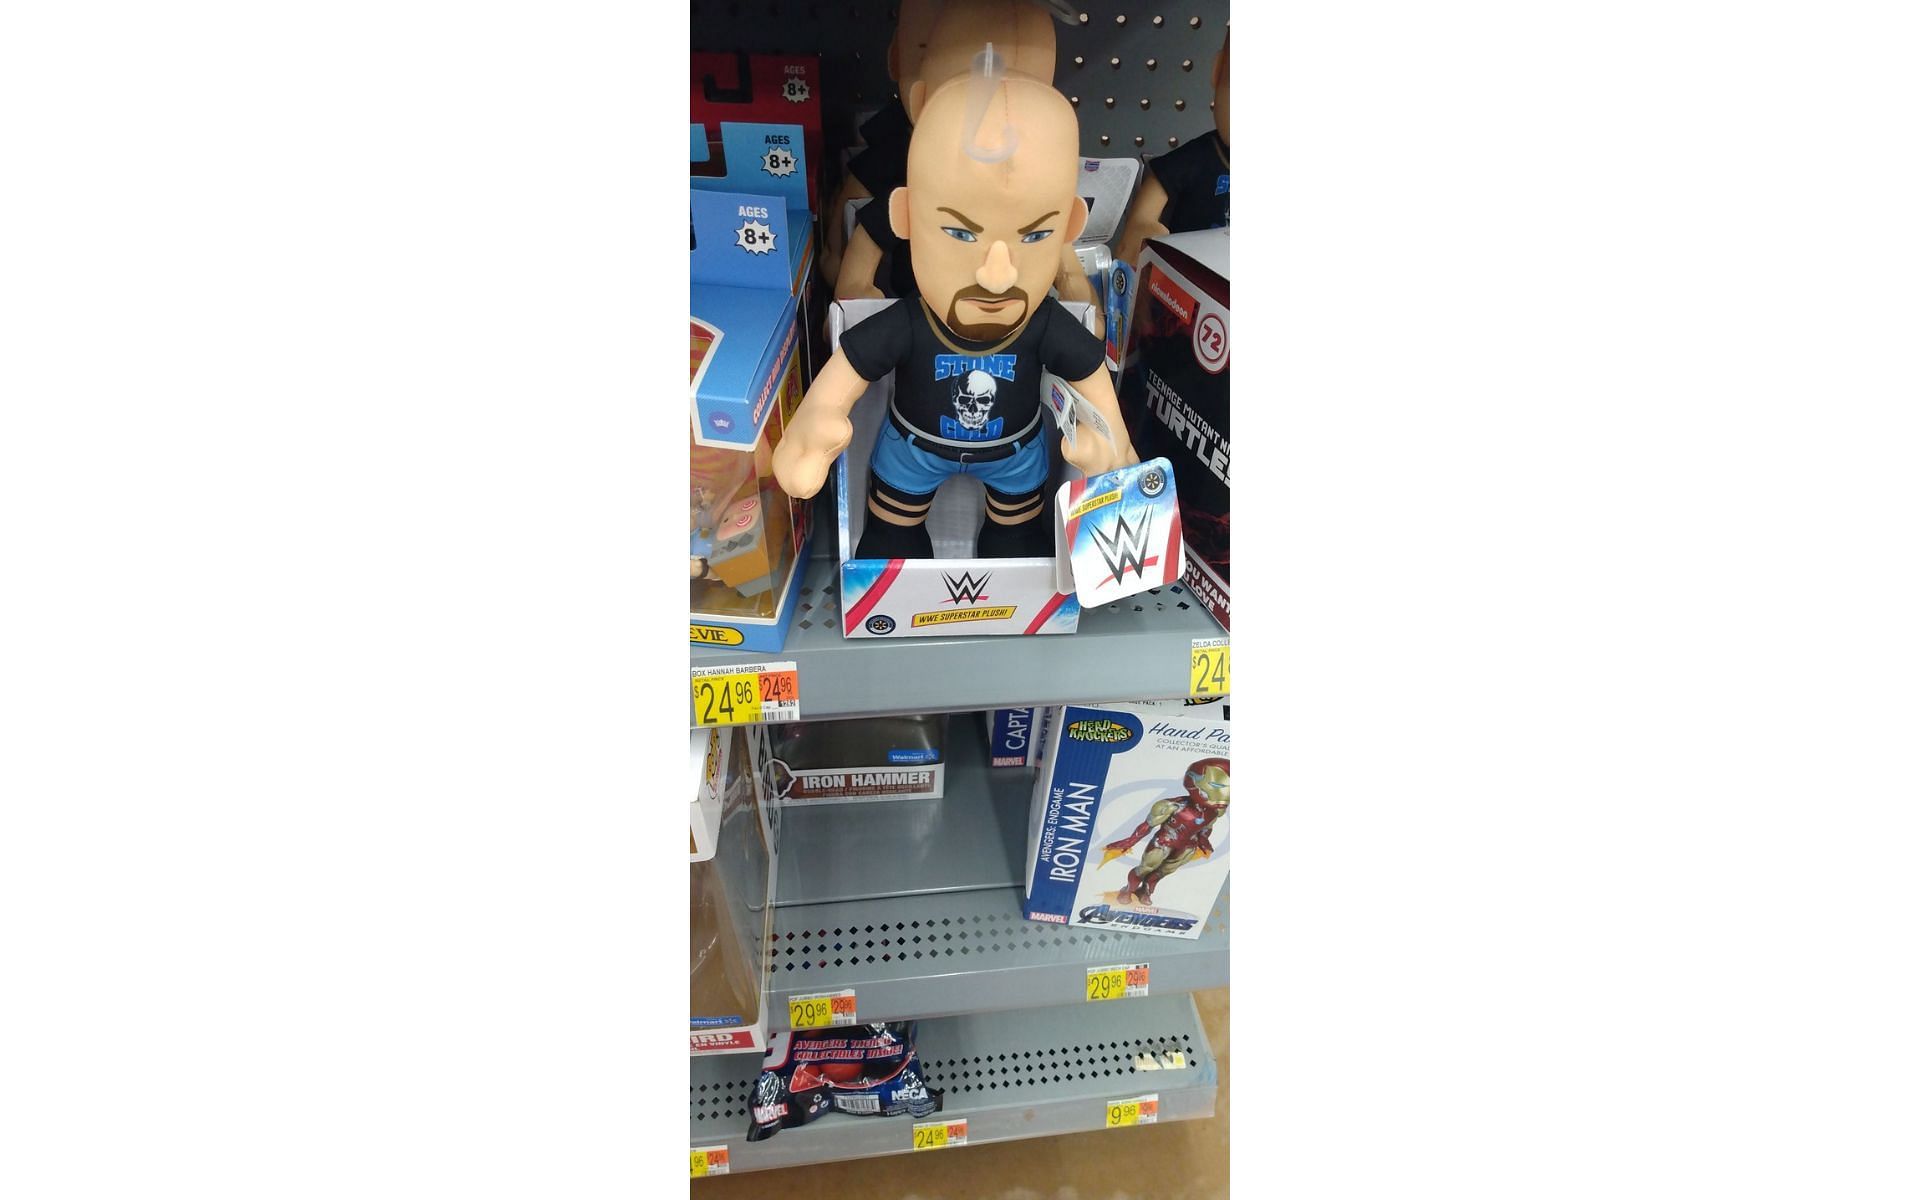 Today, Pro Wrestling journalist Bill Apter clicked a picture of Stone Cold Funko Pops at his local Walmart.